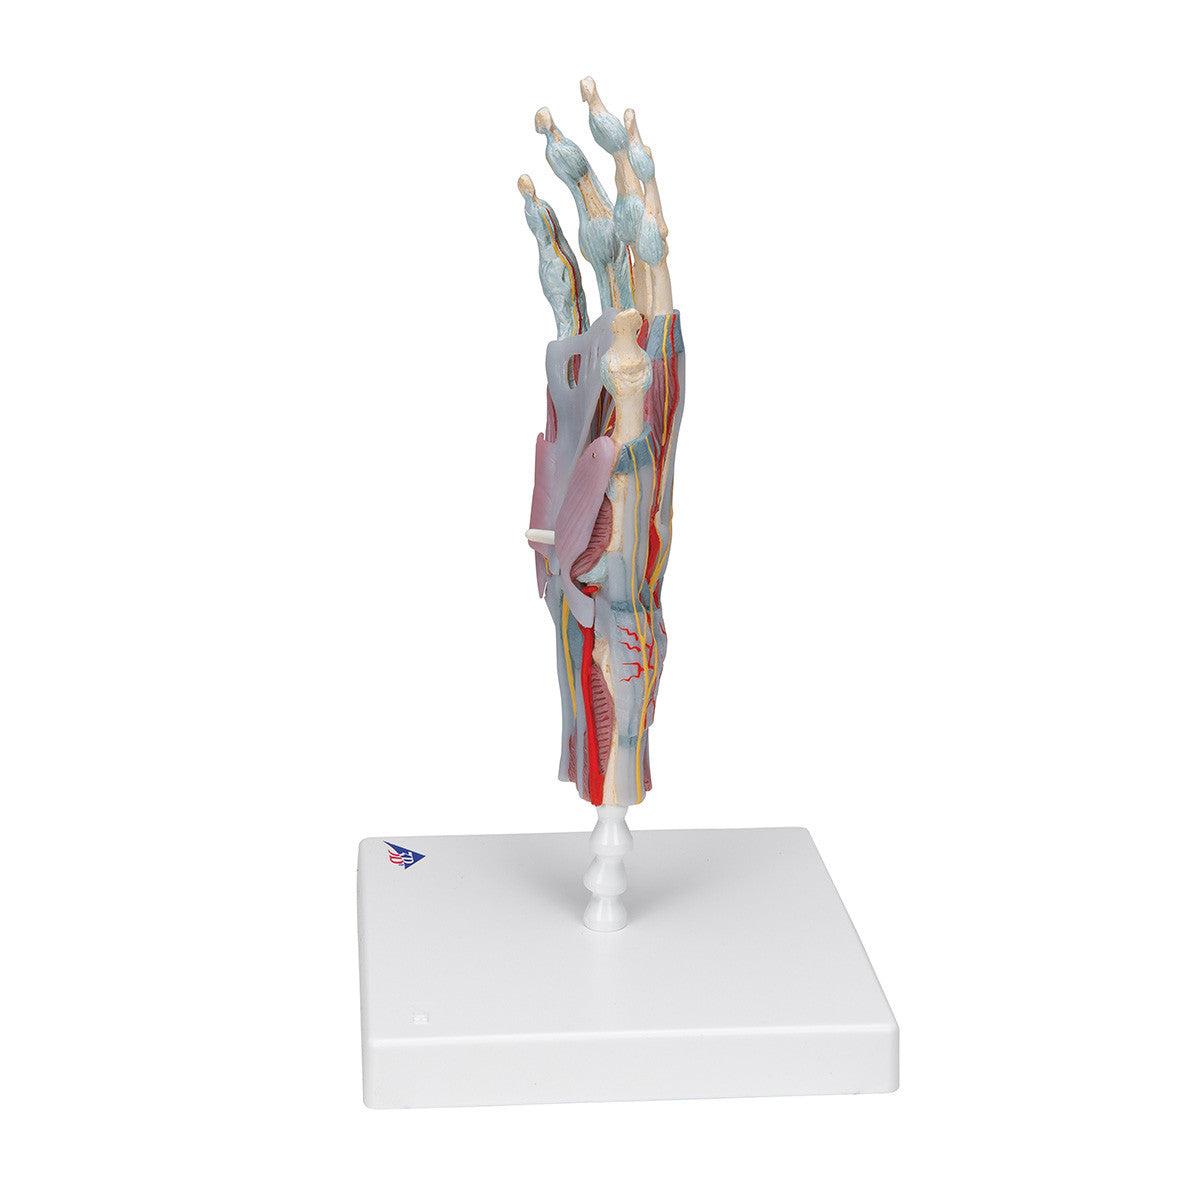 Hand Skeleton Model with Ligaments and Muscles